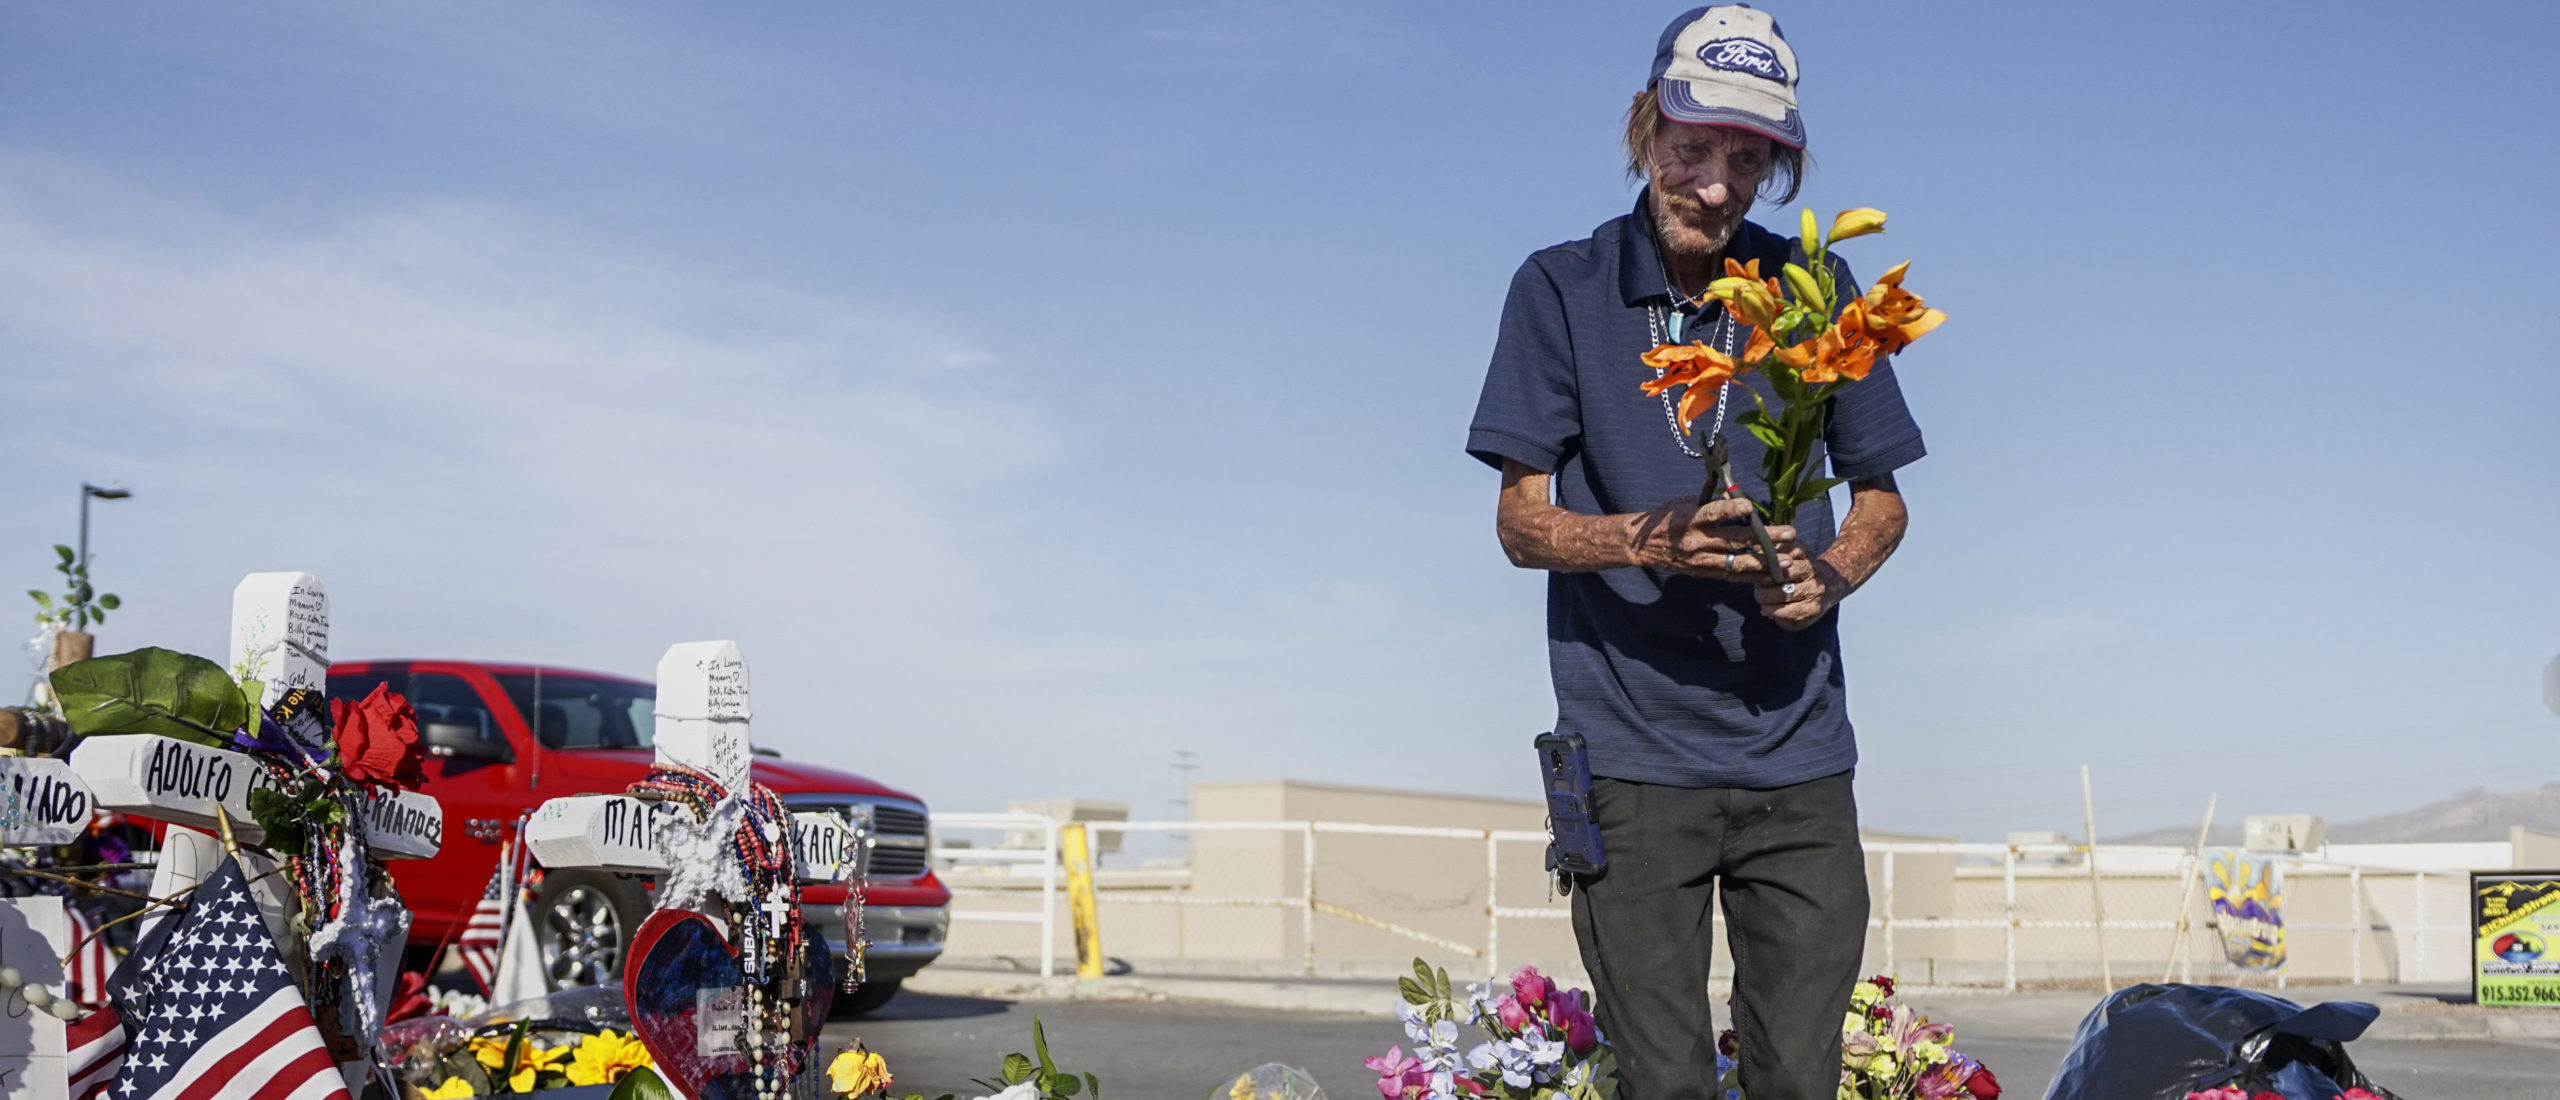 EL PASO, TX - AUGUST 16: Antonio Basco, who's wife Margie Reckard was one of 22 persons killed by a gunman at a local Walmart, lays flowers in her honor at a makeshift memorial near the scene on August 16, 2019 in El Paso, Texas. Basco has been to the memorial everyday site since it was erected to clean up the area and put out fresh flowers. 22 people were killed in Walmart during a mass shooting on August 3rd. A 21-year-old white male suspect remains in custody in El Paso which sits along the U.S.-Mexico border. (Photo by Sandy Huffaker/Getty Images)